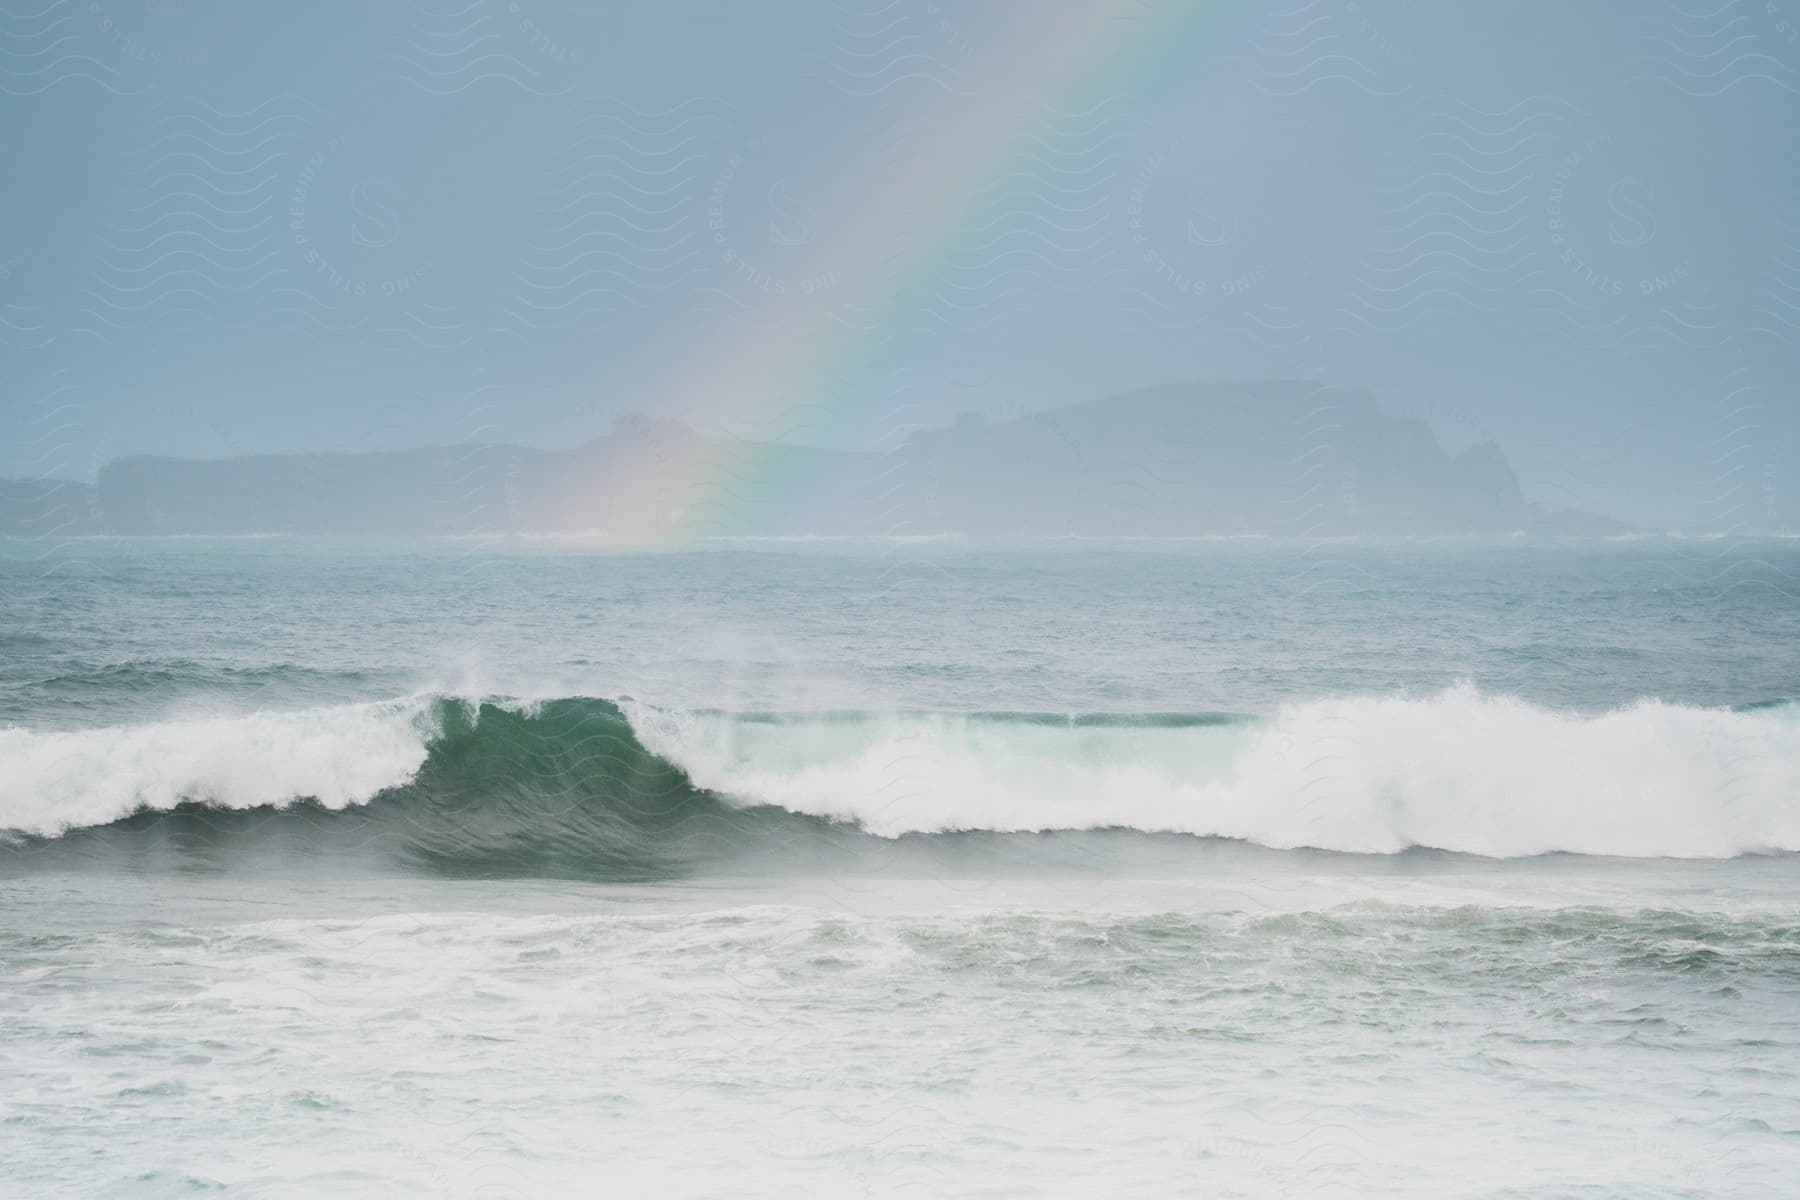 A sea wave breaking on the surface of the water and behind it is a rainbow